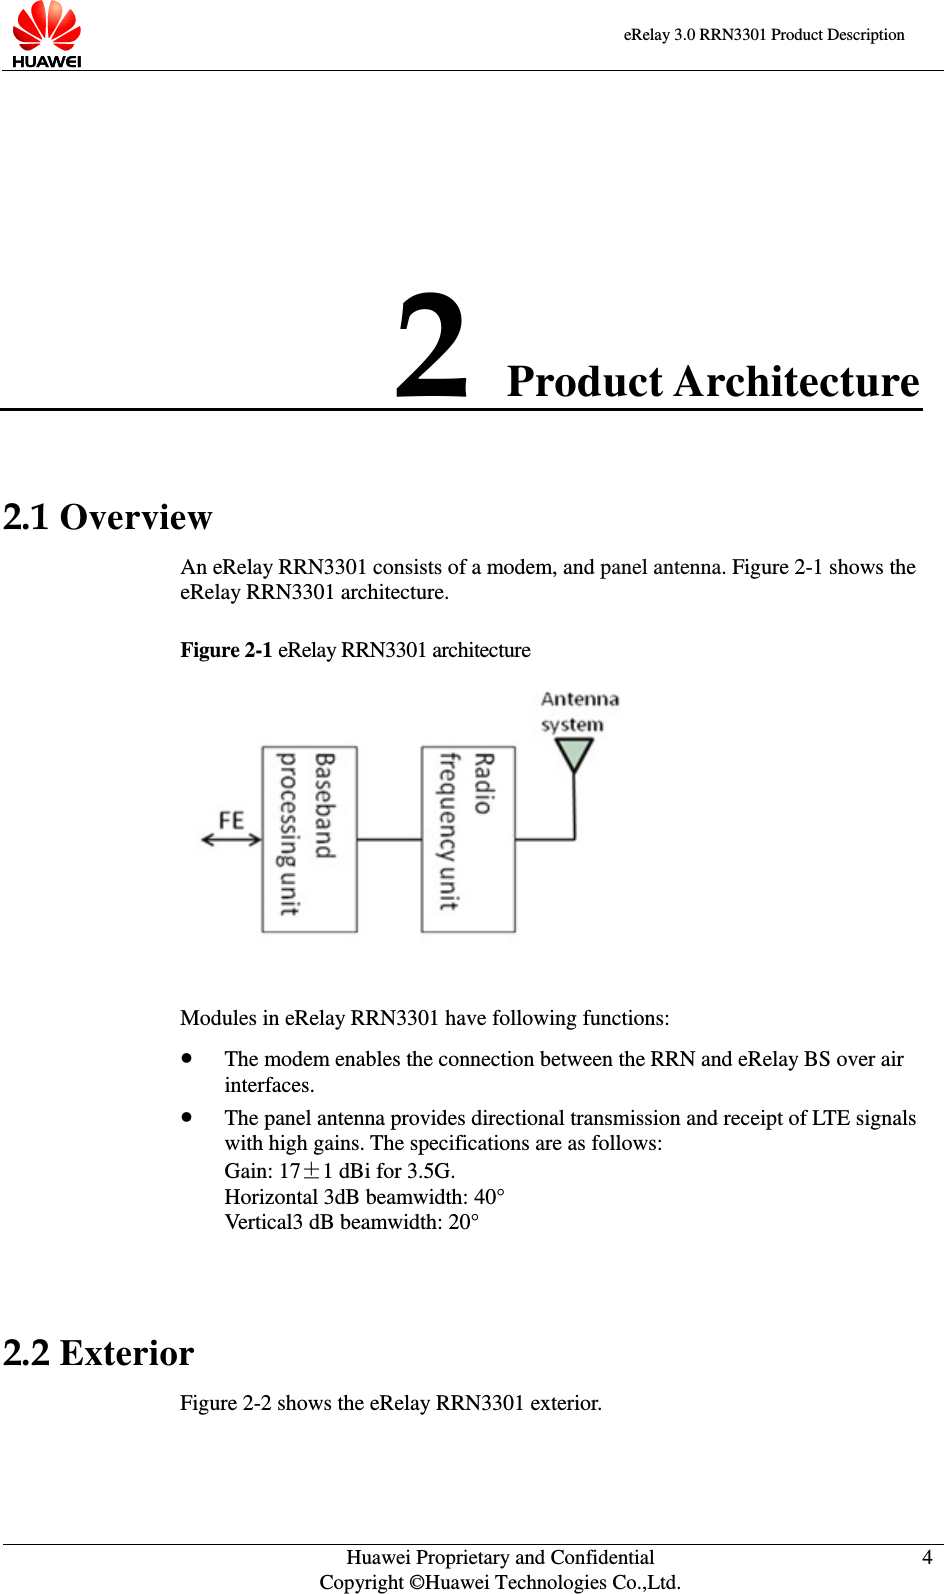    eRelay 3.0 RRN3301 Product Description    Huawei Proprietary and Confidential Copyright ©Huawei Technologies Co.,Ltd. 4  2 Product Architecture 2.1 Overview An eRelay RRN3301 consists of a modem, and panel antenna. Figure 2-1 shows the eRelay RRN3301 architecture.   Figure 2-1 eRelay RRN3301 architecture   Modules in eRelay RRN3301 have following functions:    The modem enables the connection between the RRN and eRelay BS over air interfaces.    The panel antenna provides directional transmission and receipt of LTE signals with high gains. The specifications are as follows:   Gain: 17±1 dBi for 3.5G.   Horizontal 3dB beamwidth: 40° Vertical3 dB beamwidth: 20°  2.2 Exterior Figure 2-2 shows the eRelay RRN3301 exterior. 